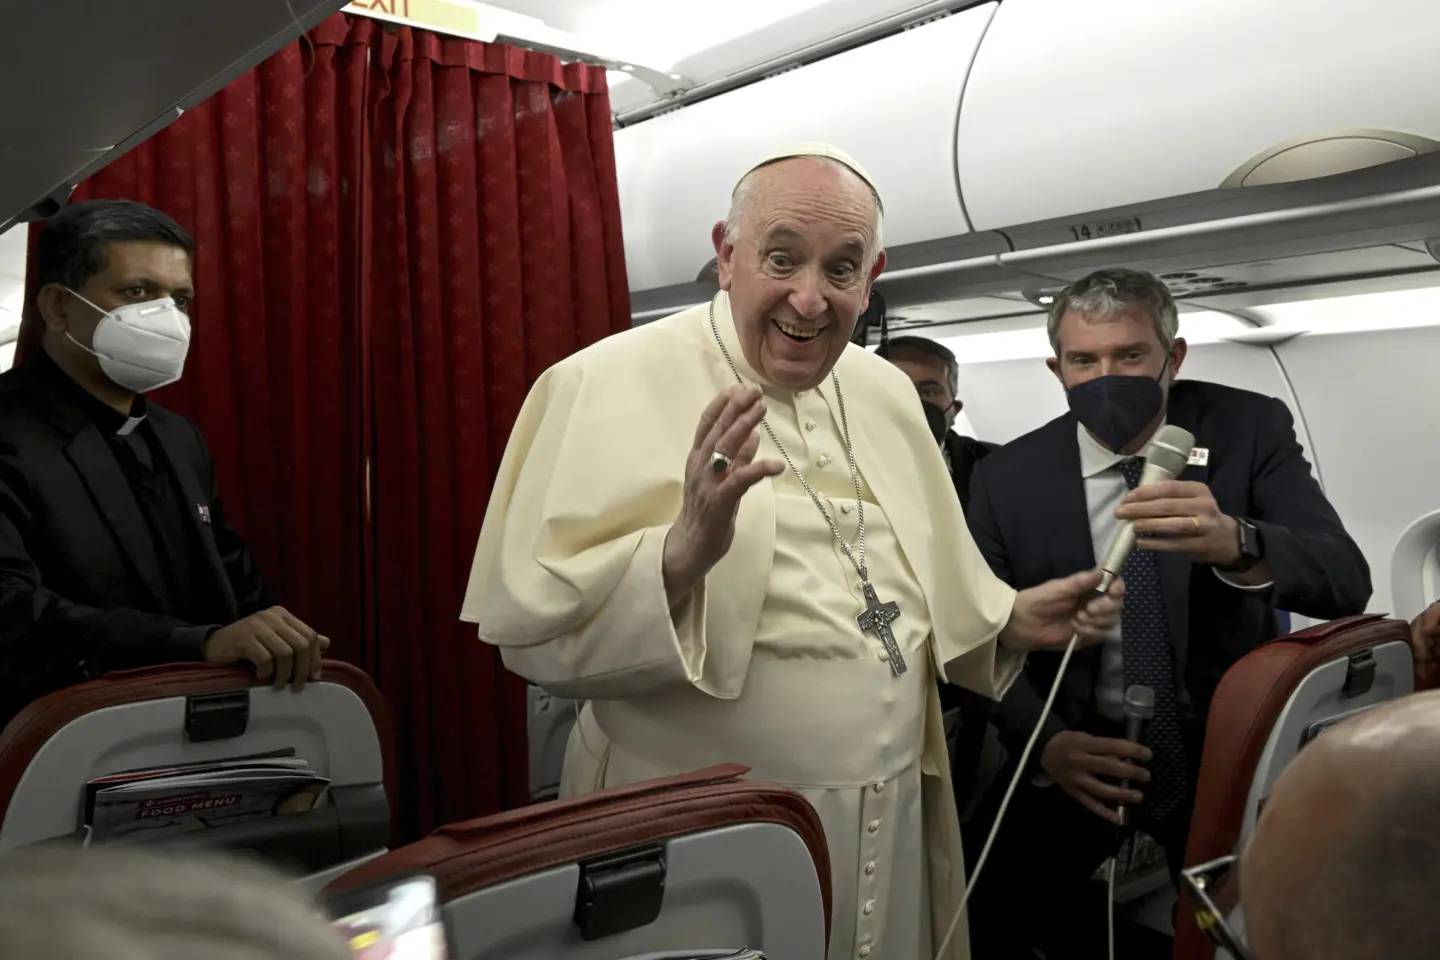 Pope Francis greets the journalists onboard the papal plane during the flight back to Rome at the end of his two-day apostolic visit to Malta, Sunday, April 3, 2022. (Credit: Ciro Fusco /Pool photo via AP.)